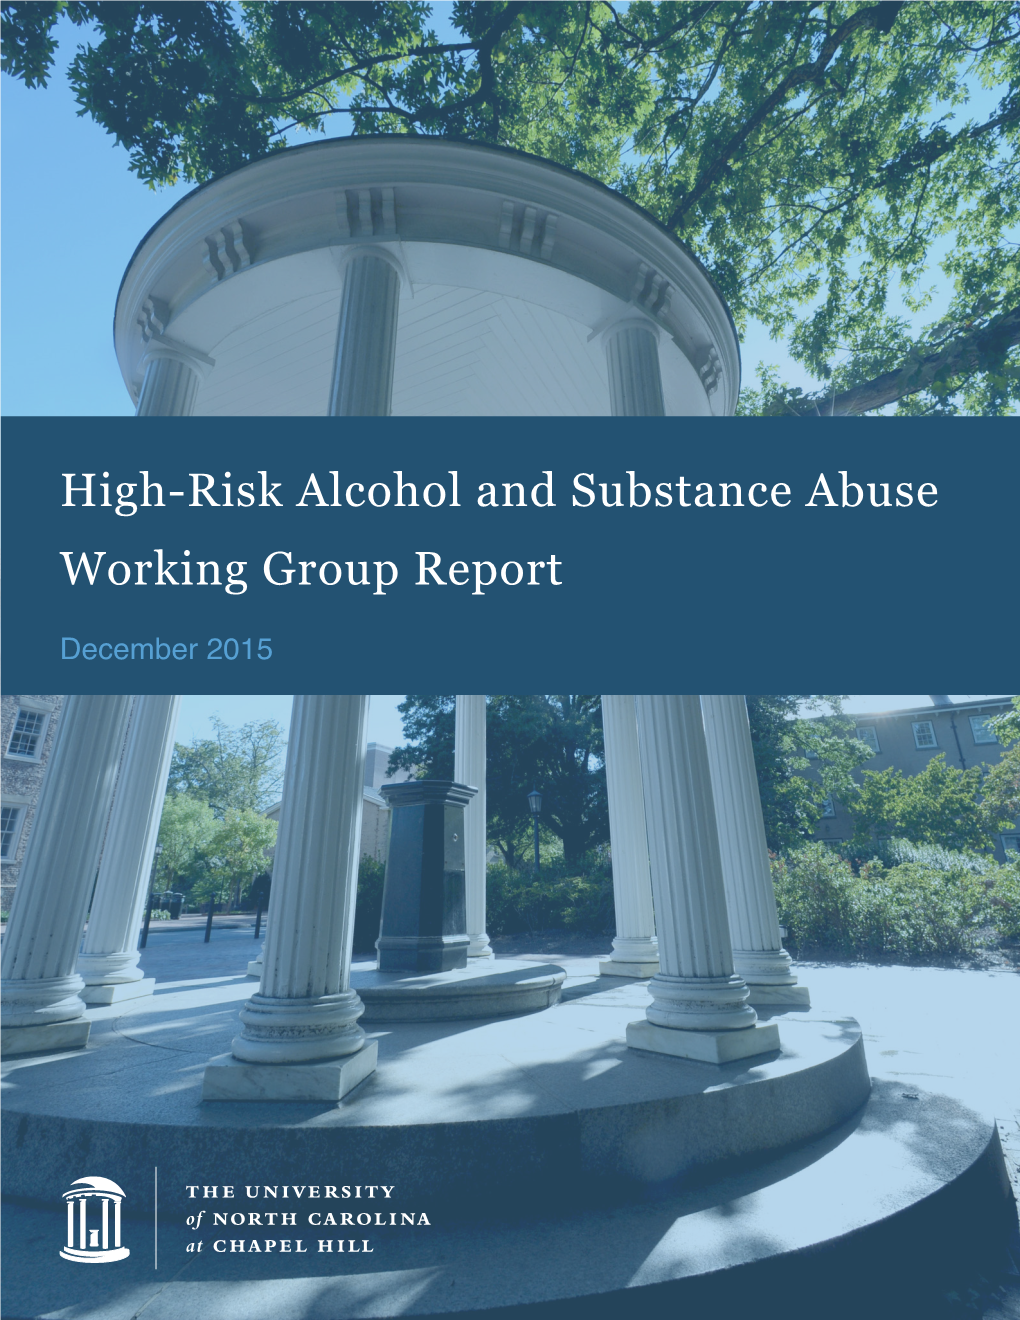 High-Risk Alcohol and Substance Abuse Working Group Report